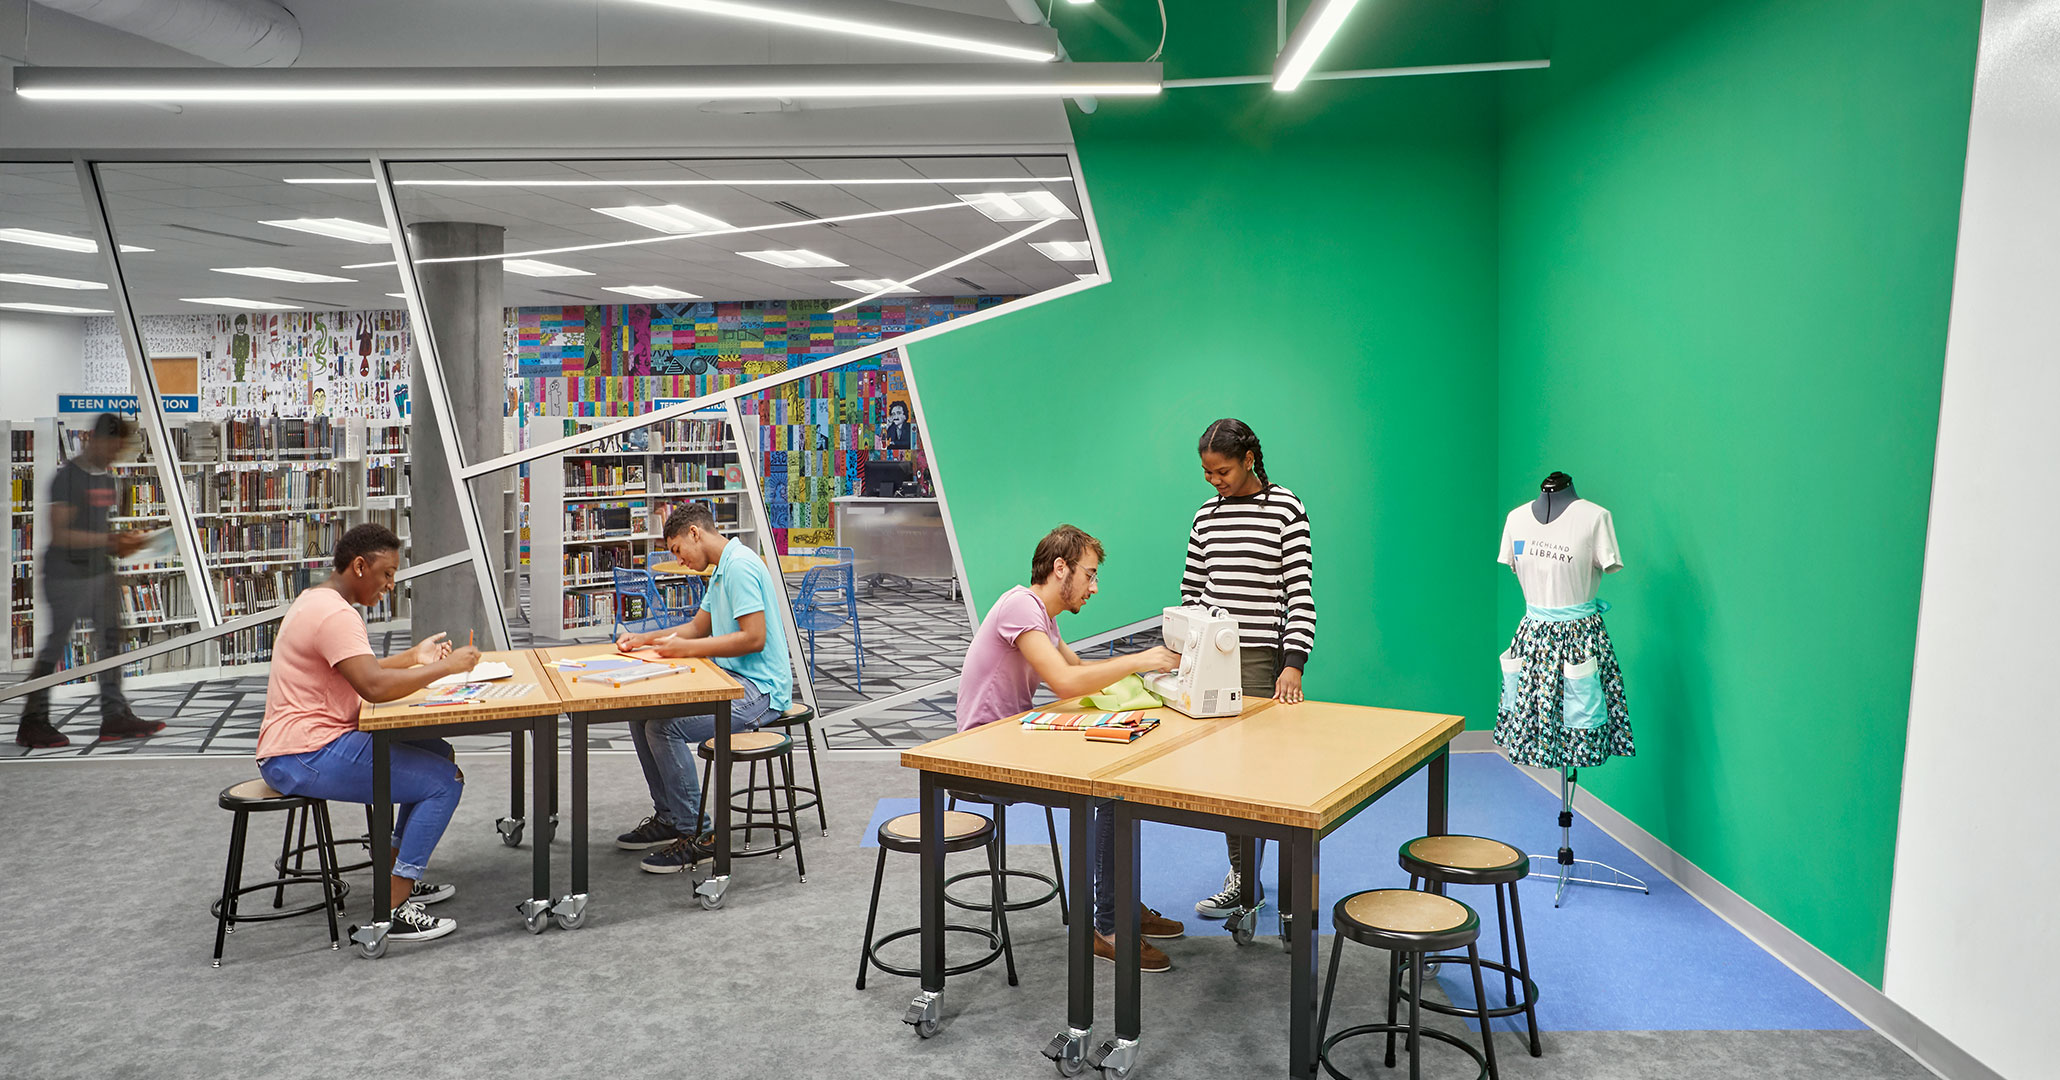 Richland County Library worked with Boudreaux to design DIY spaces for patrons.